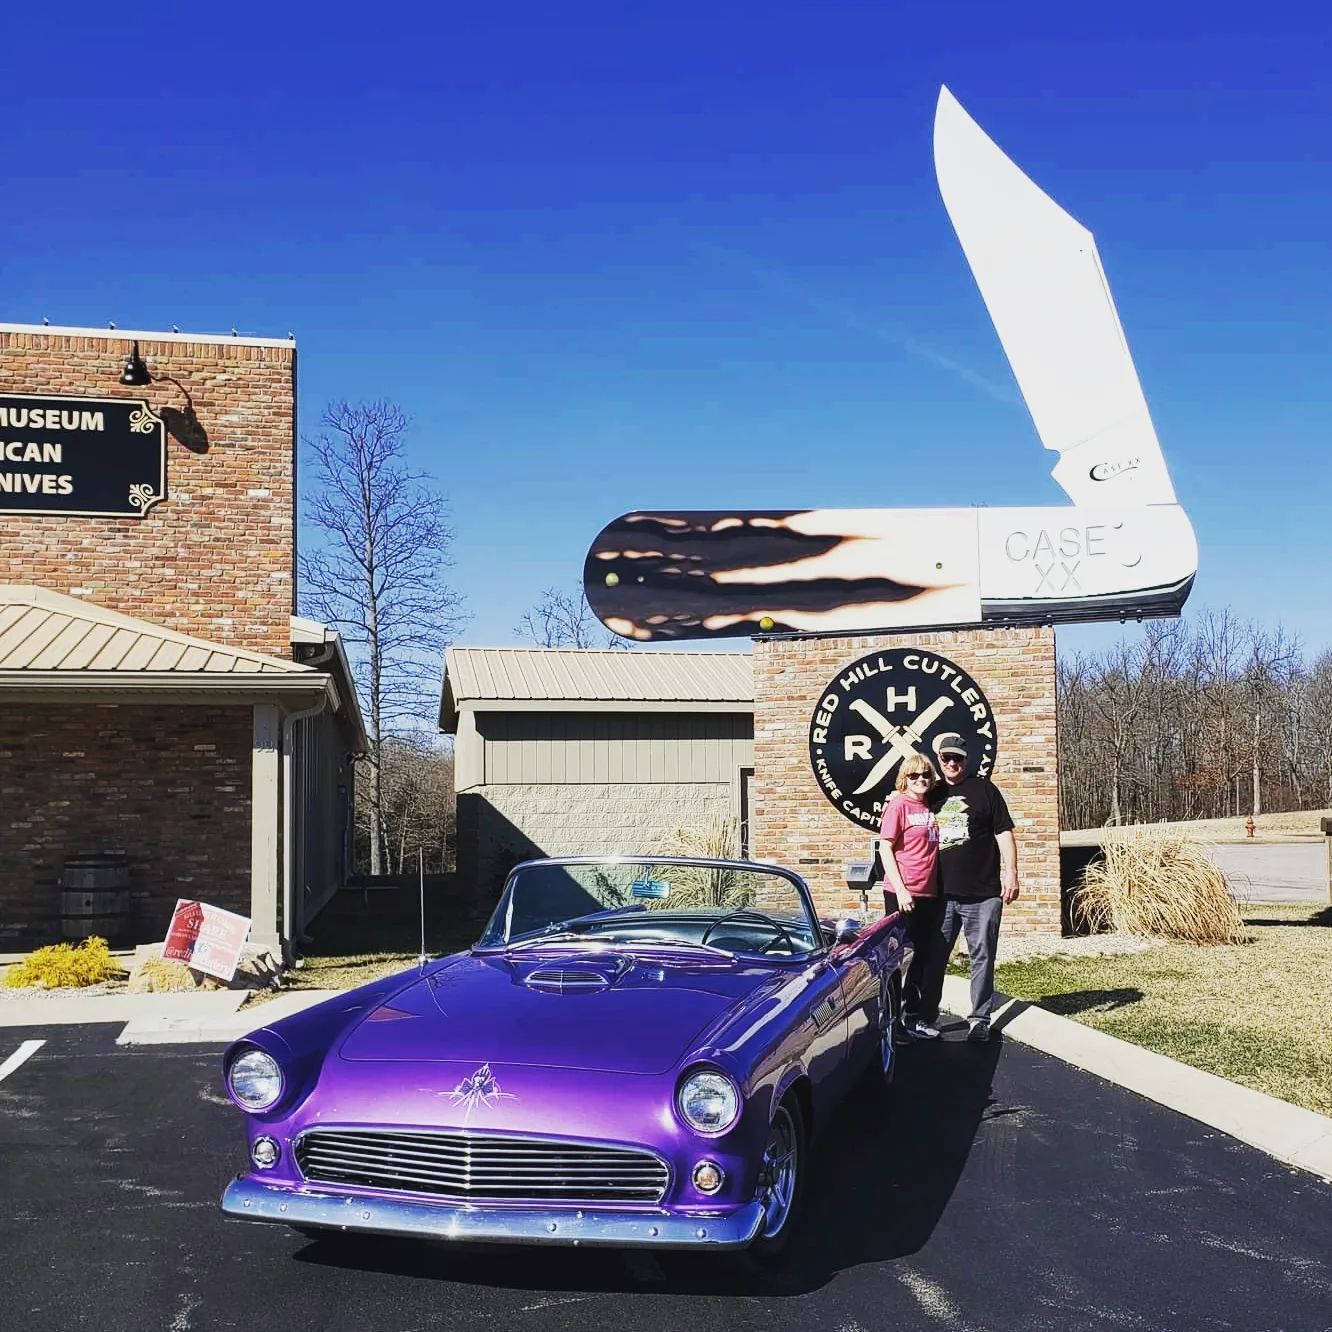 World's Largest Pocket Knife: world record in Radcliff, Kentucky